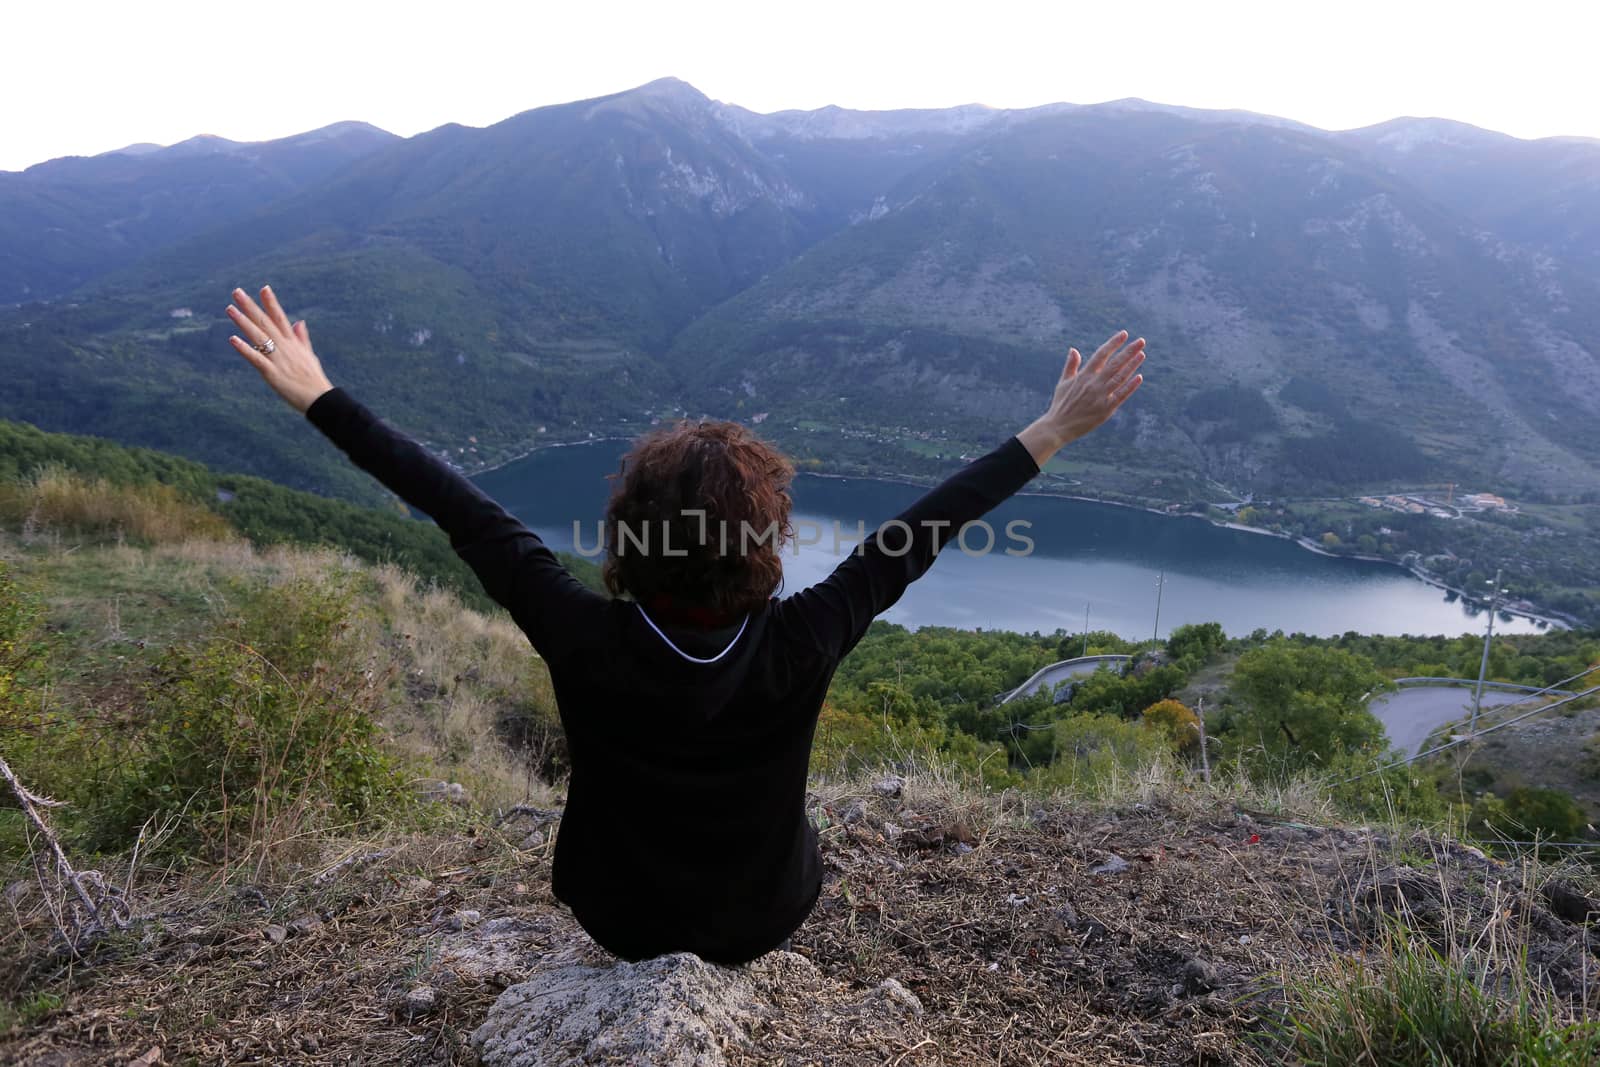 Scanno, Italy - October 12, 2019: The lake seen from Frattura with girl from behind by antonionardelli